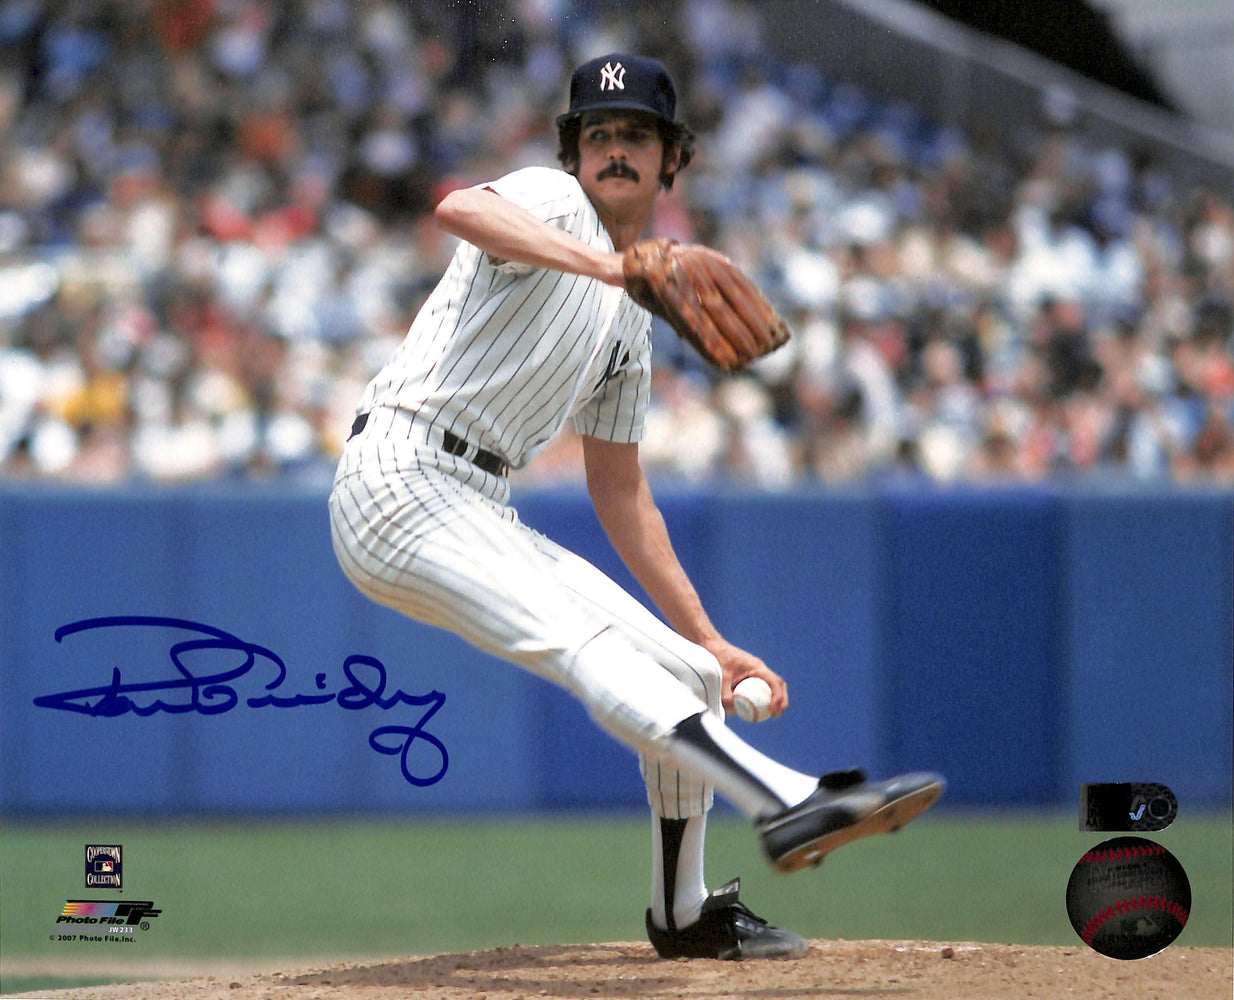 ron guidry signed 8x10 photo aiv certificate of authenticity